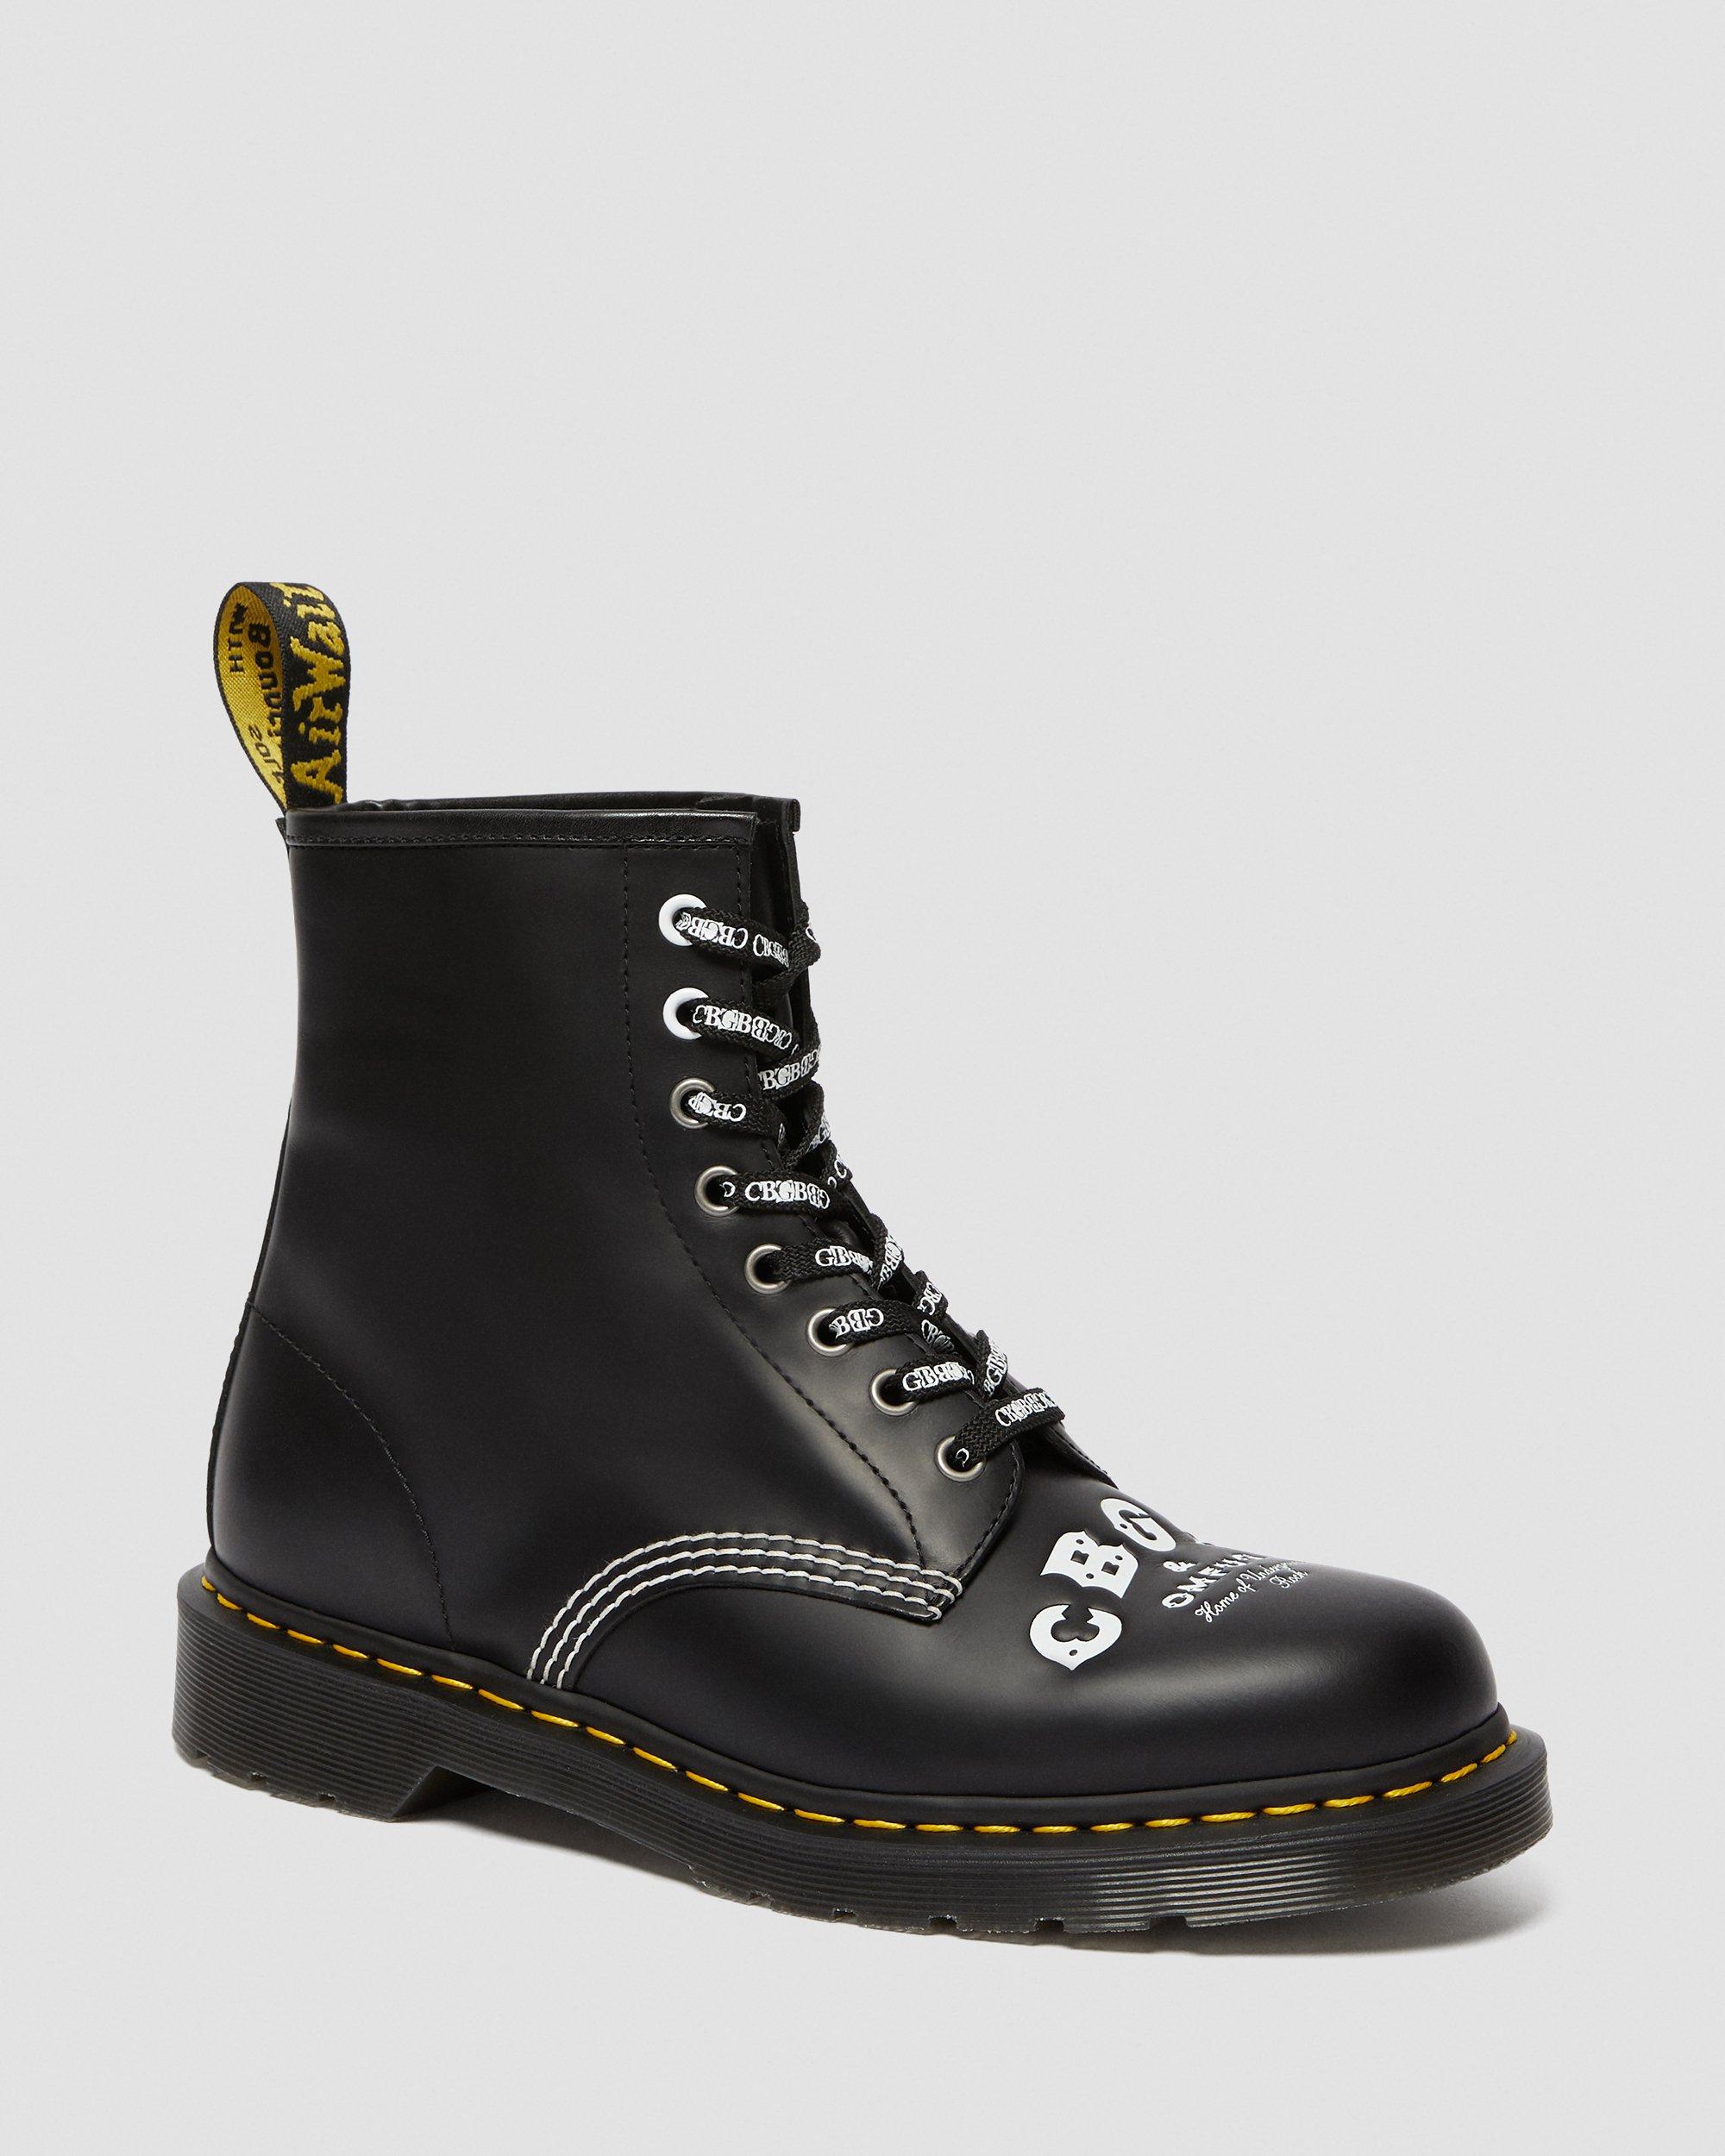 DR MARTENS 1460 Cbgb Smooth Leather Lace Up Boots